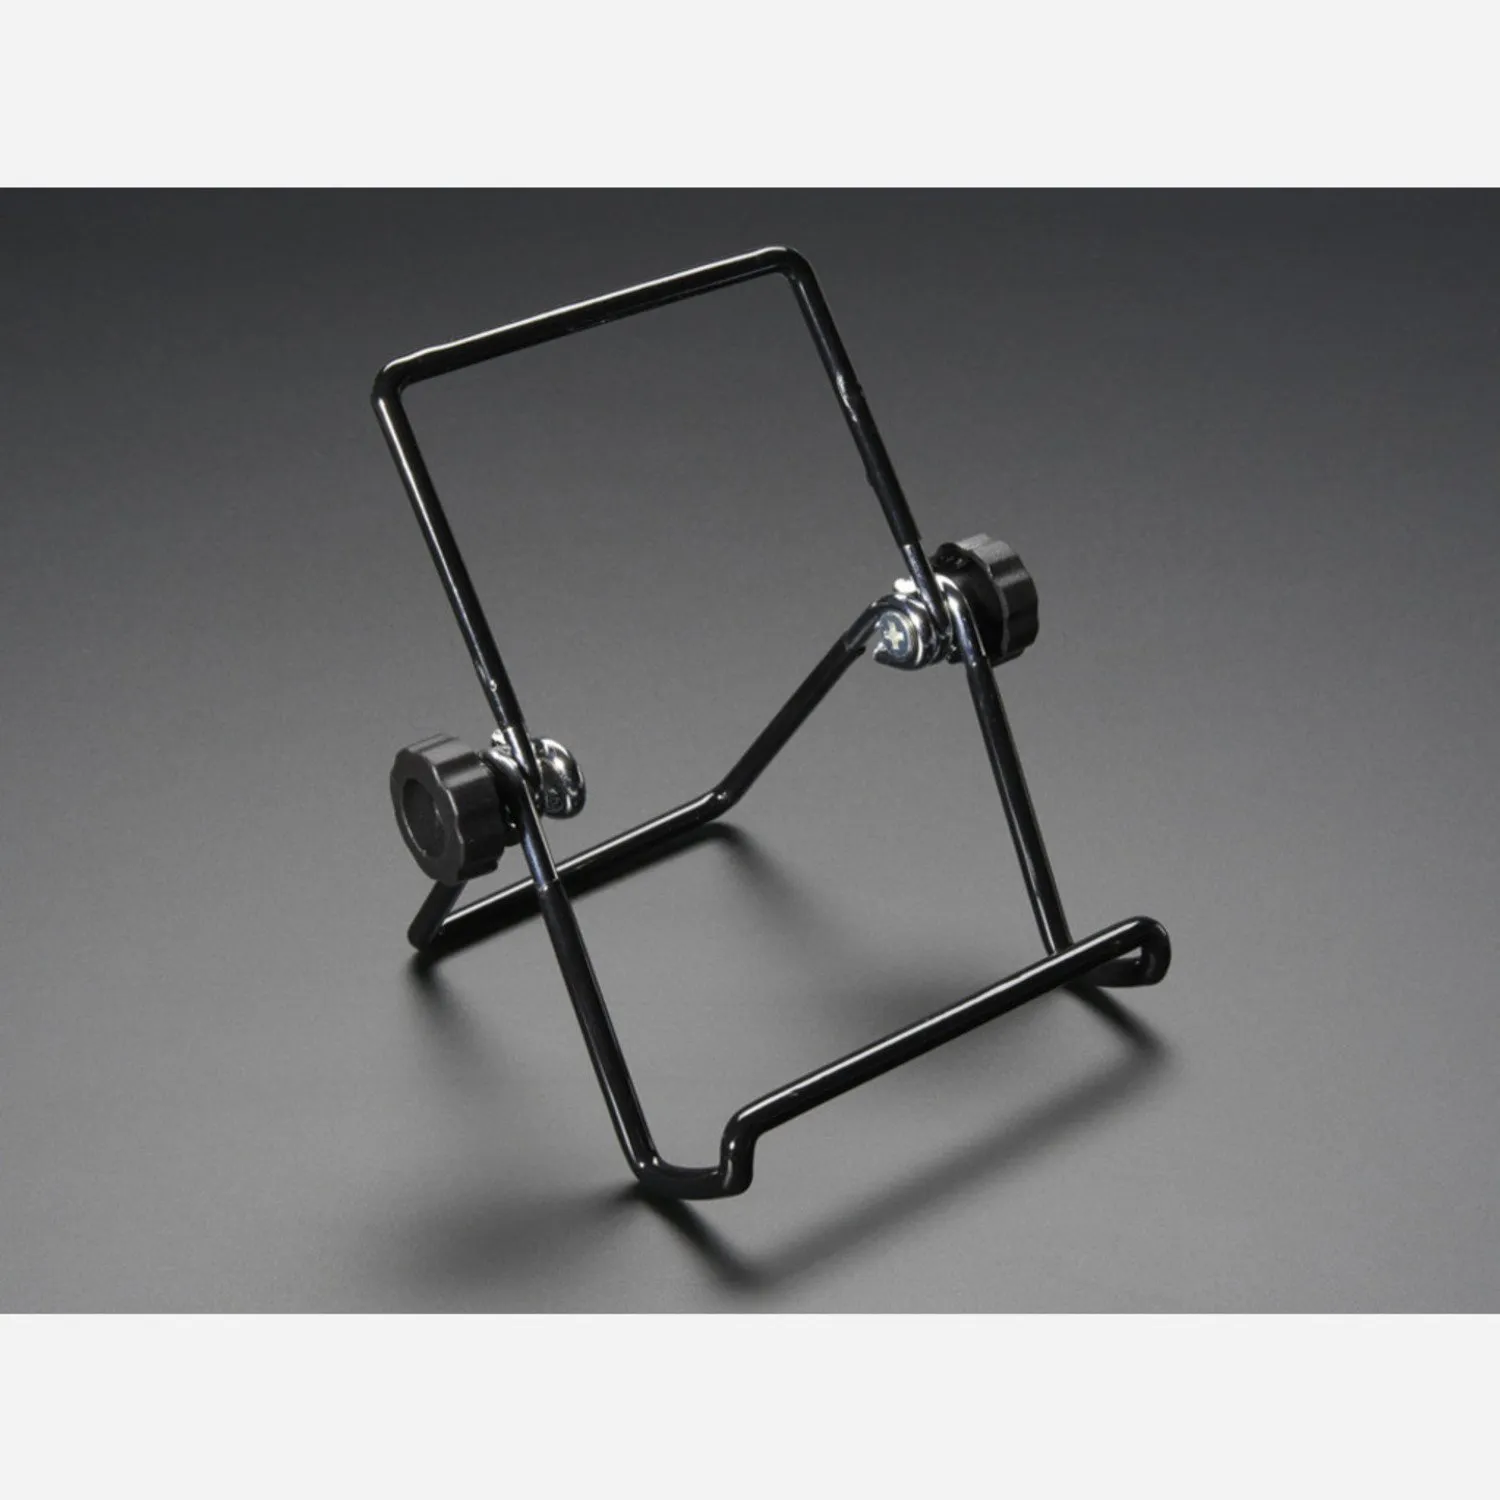 Photo of Adjustable Bent-Wire Stand - up to 7 Tablets and Small Screens